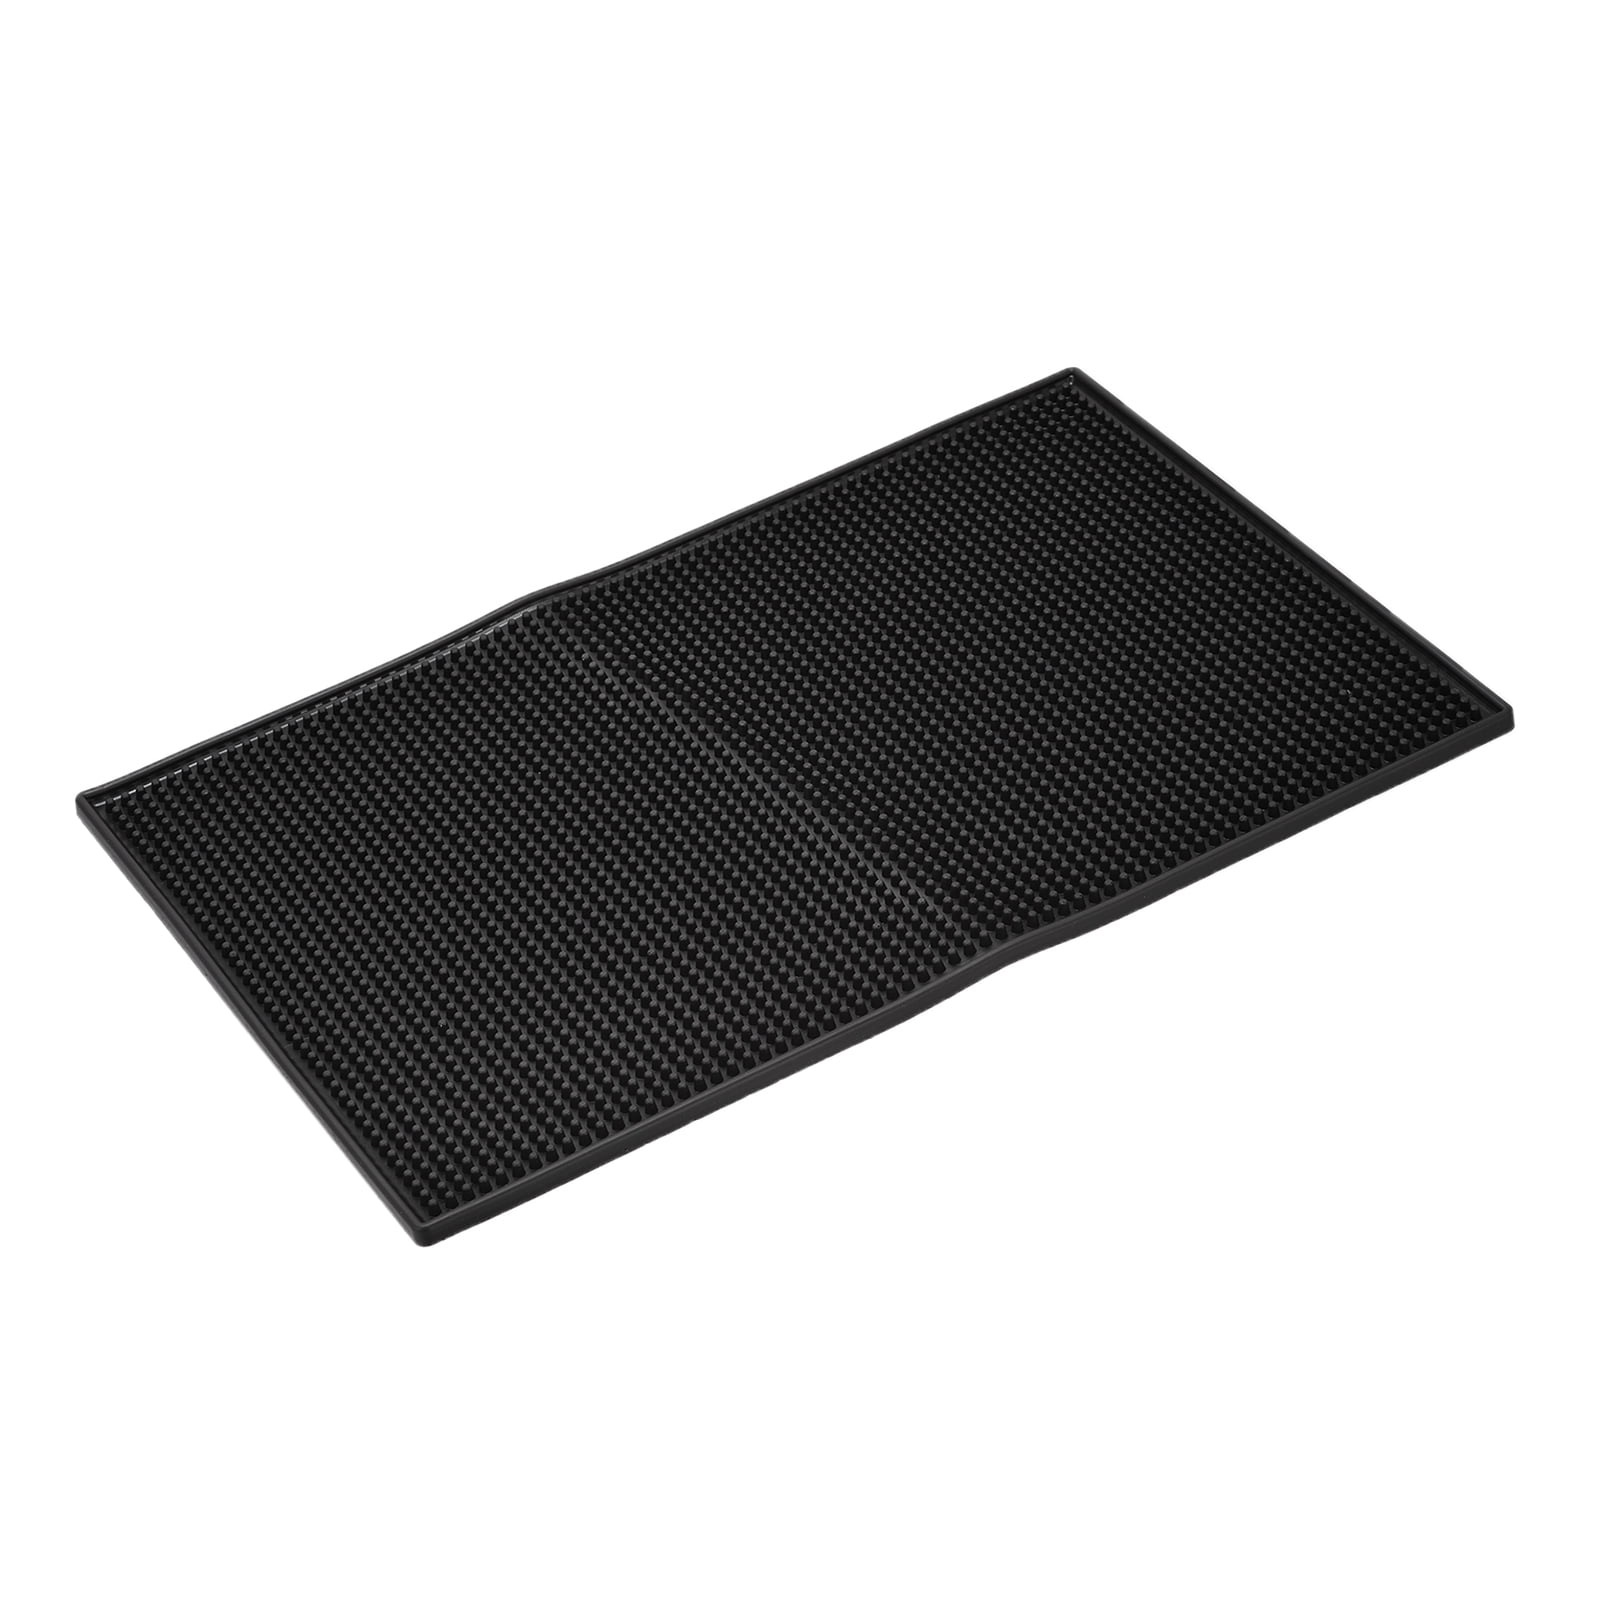 Dioche Workbench Mat Repair Mat Silicone Heat Resistant Computer Phone  Solder Station Parts Tools Pad,Workbench Mat 